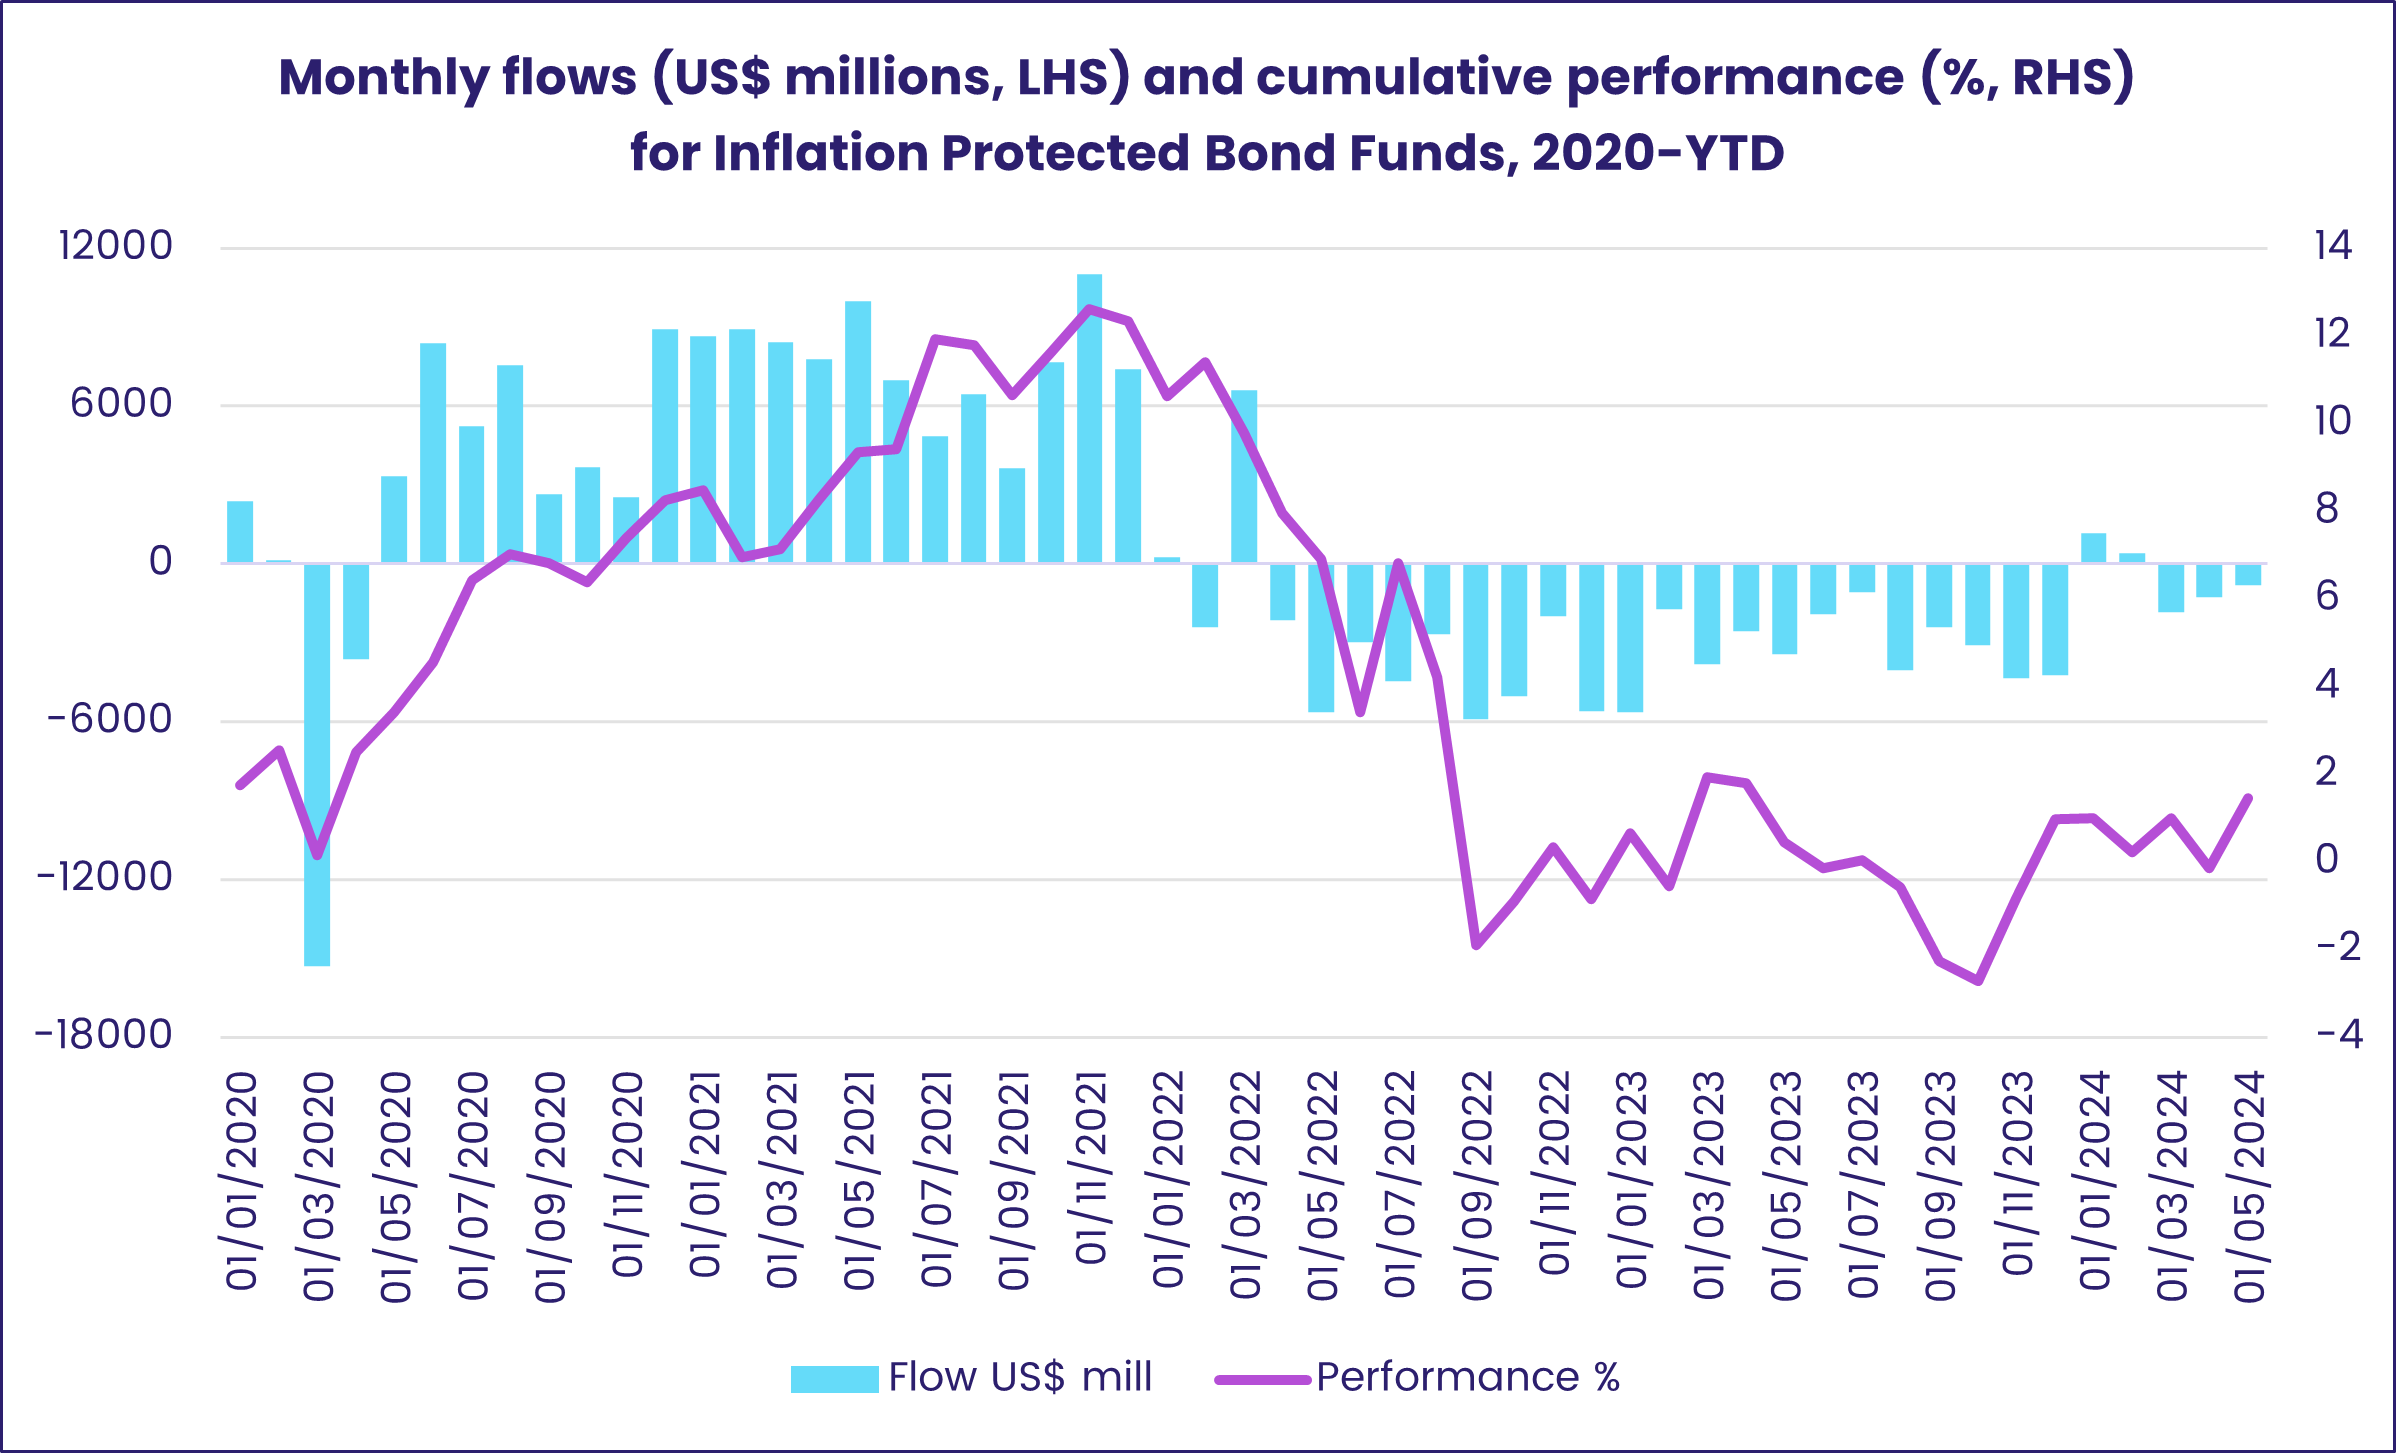 Monthly flows (US$ millions, LHS) and cumulative performance (%, RHS) for Inflation Protected Bond Funds, 2020-YTD